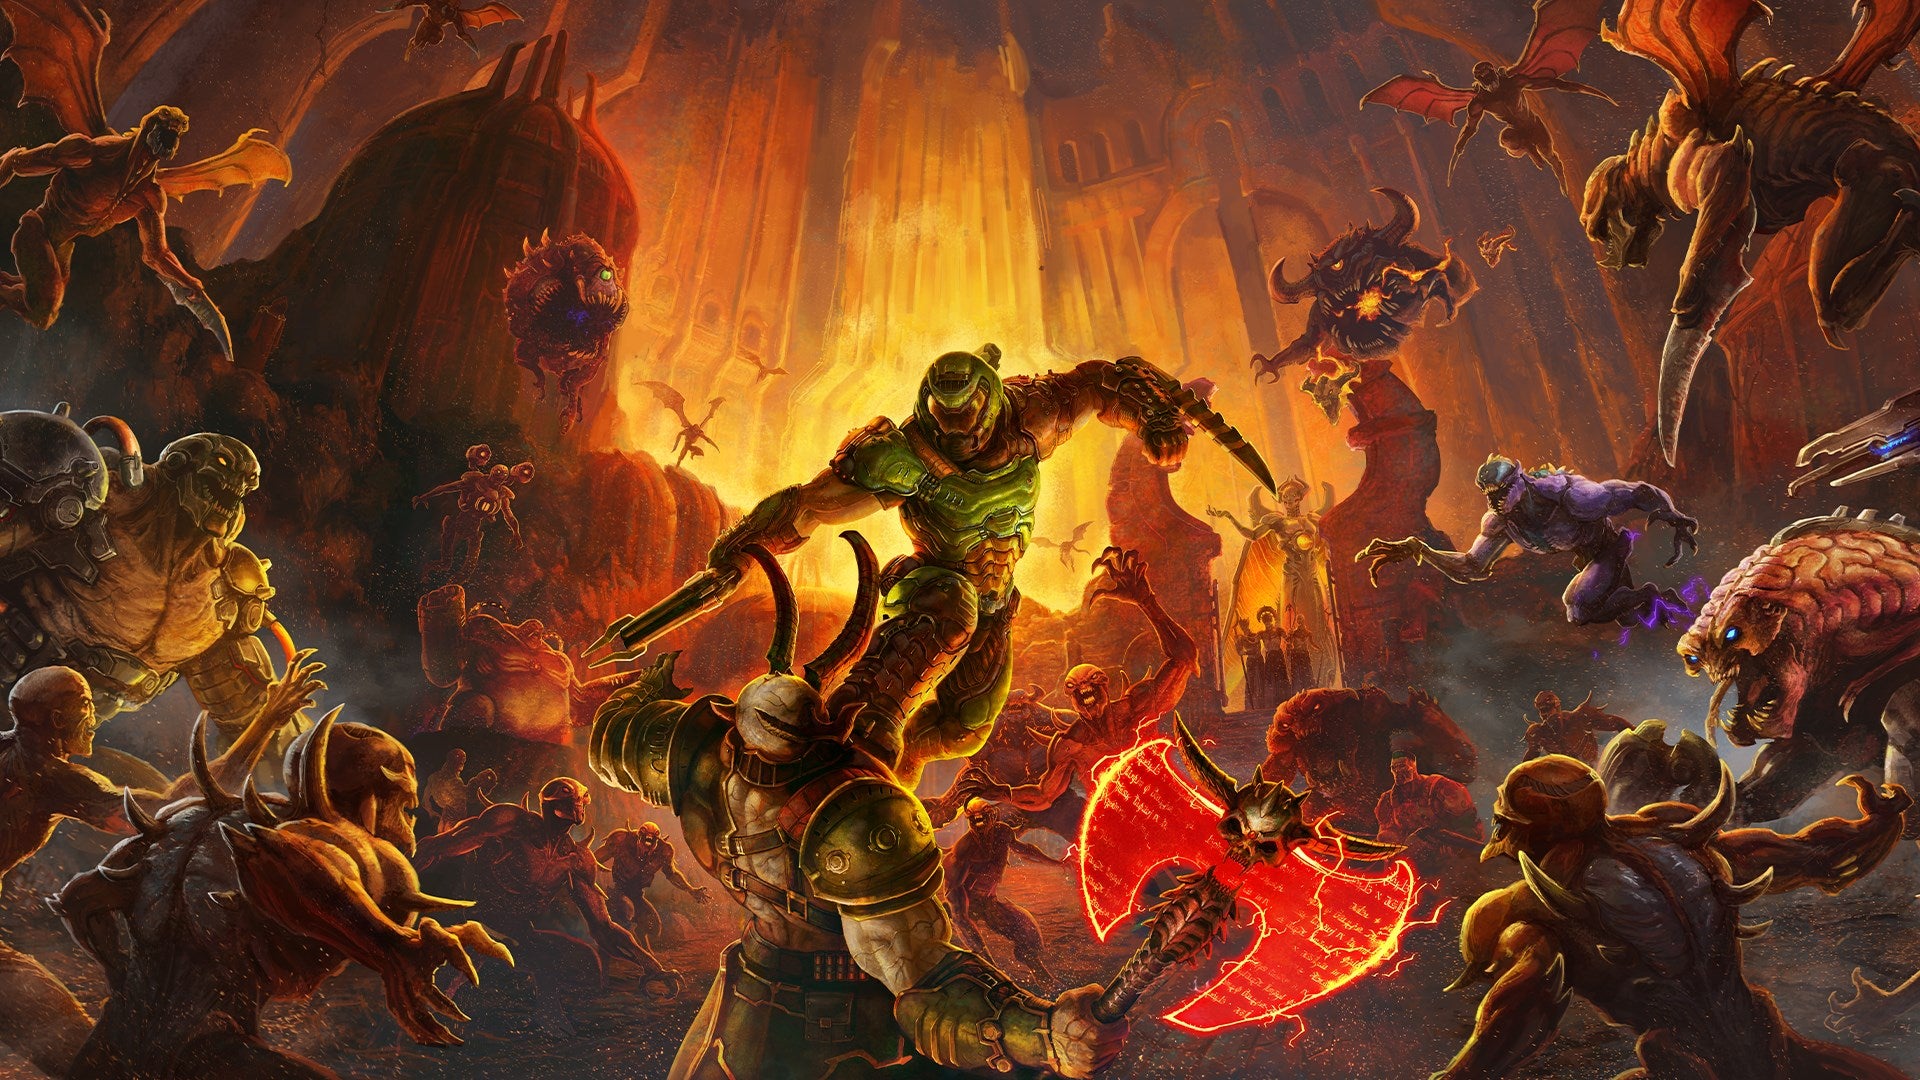 Image for “There are more stories to tell with the Doom Slayer” says Doom Eternal dev